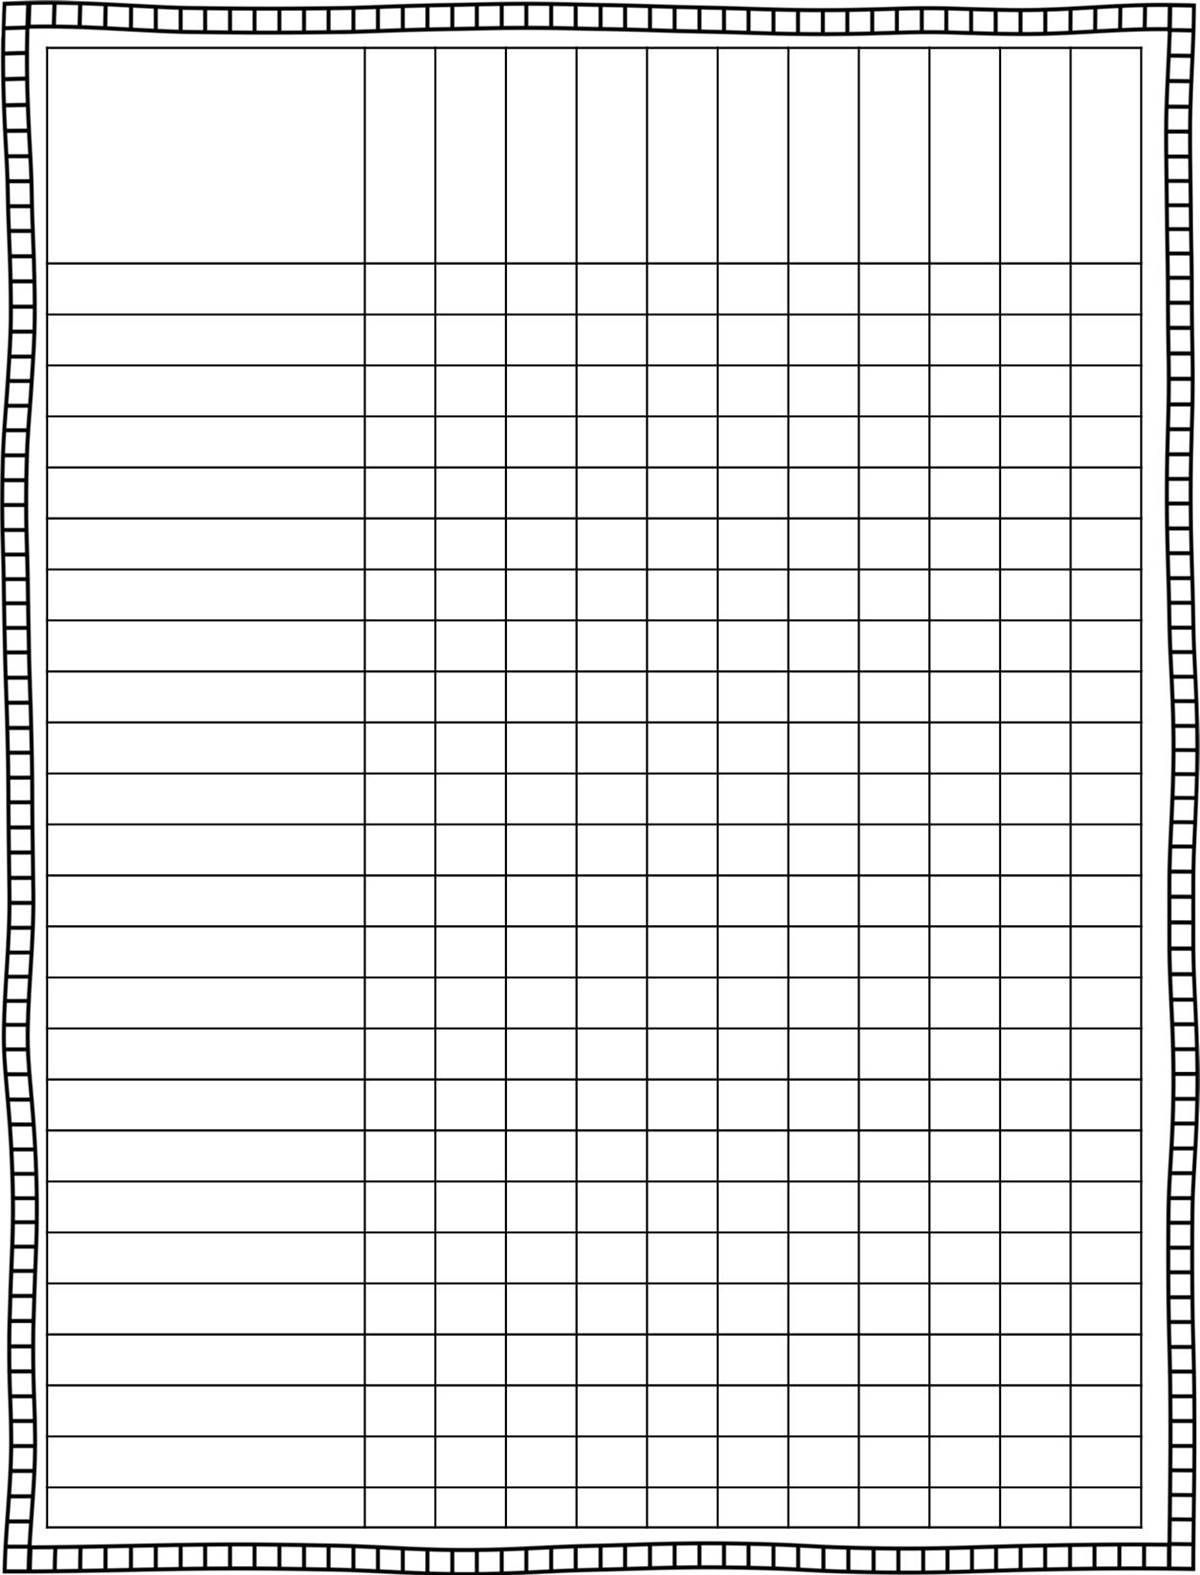 Classroom Schedule Template For Teachers | Finally, A Cute Lesson - Free Printable Gradebook Sheets For Teachers